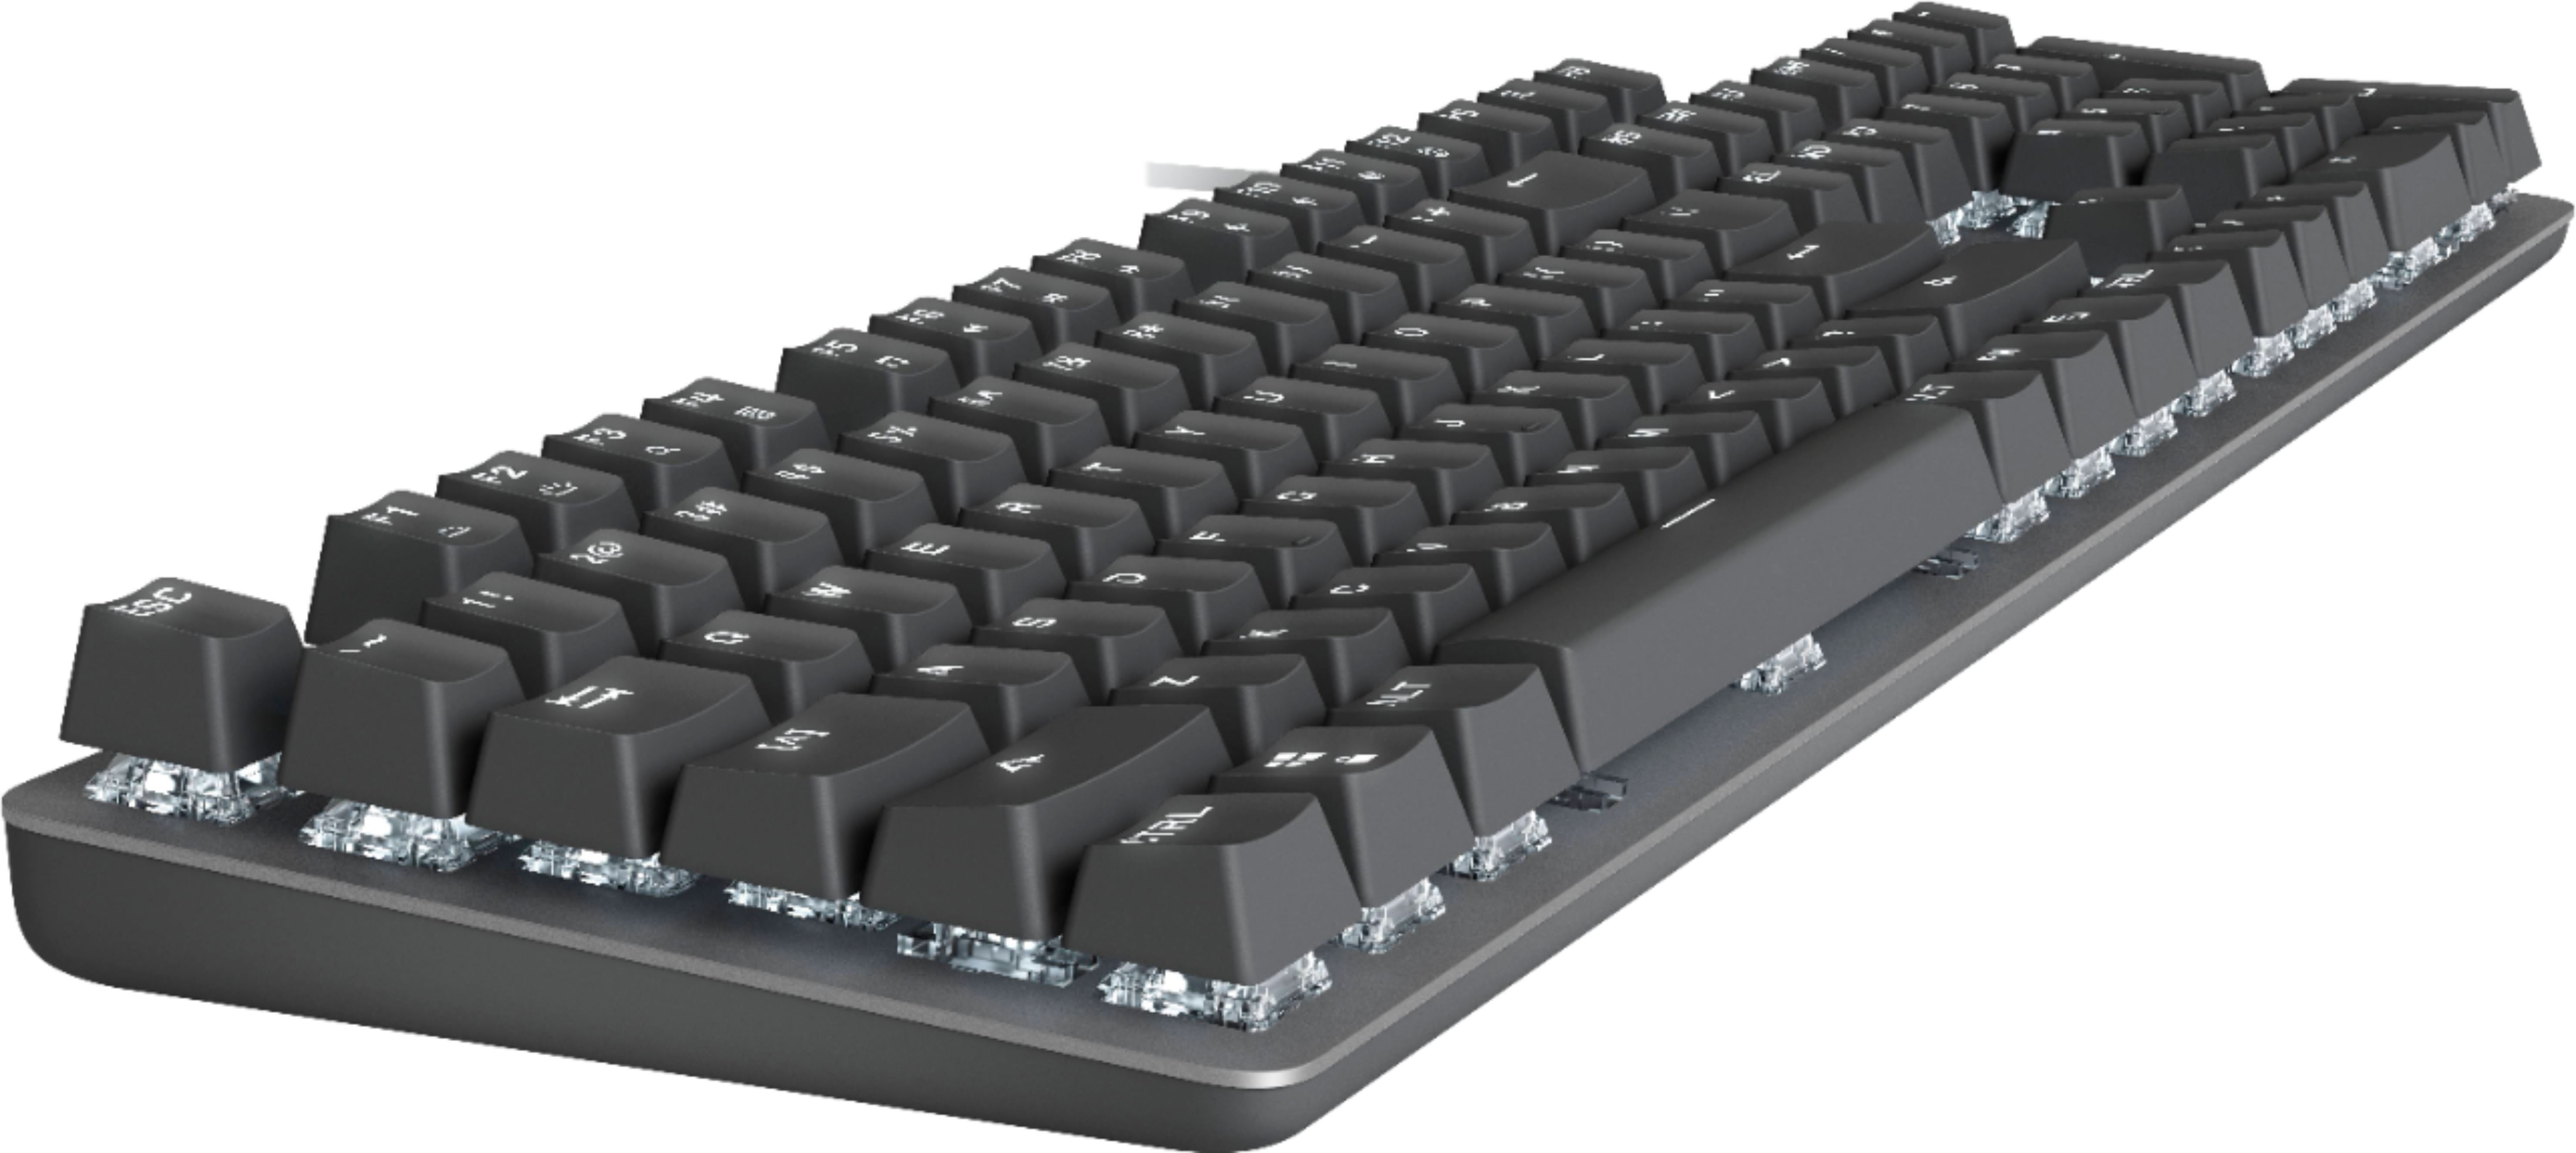 Angle View: Logitech - K845 Full-size Wired Mechanical Linear Keyboard - Graphite